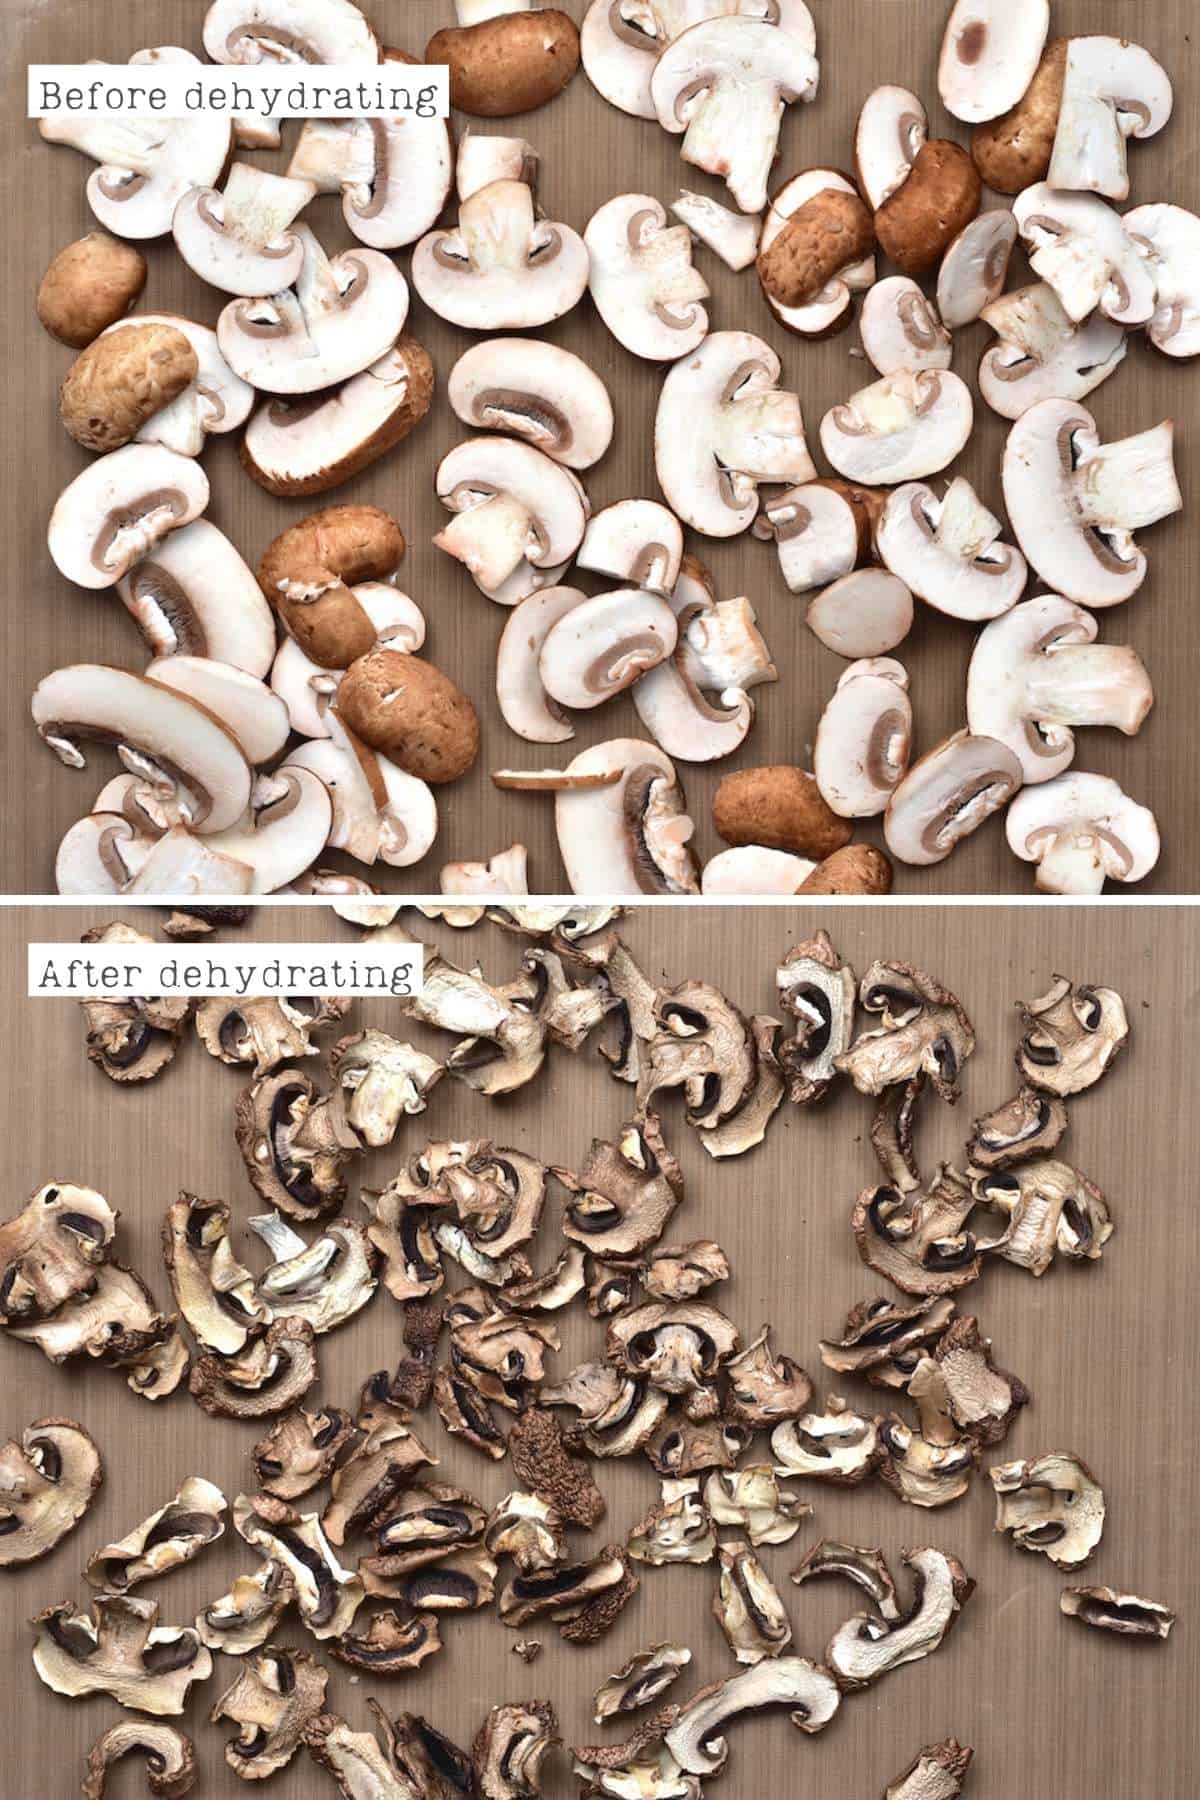 https://www.alphafoodie.com/wp-content/uploads/2021/02/Before-and-after-dehydrating-mushrooms.jpg